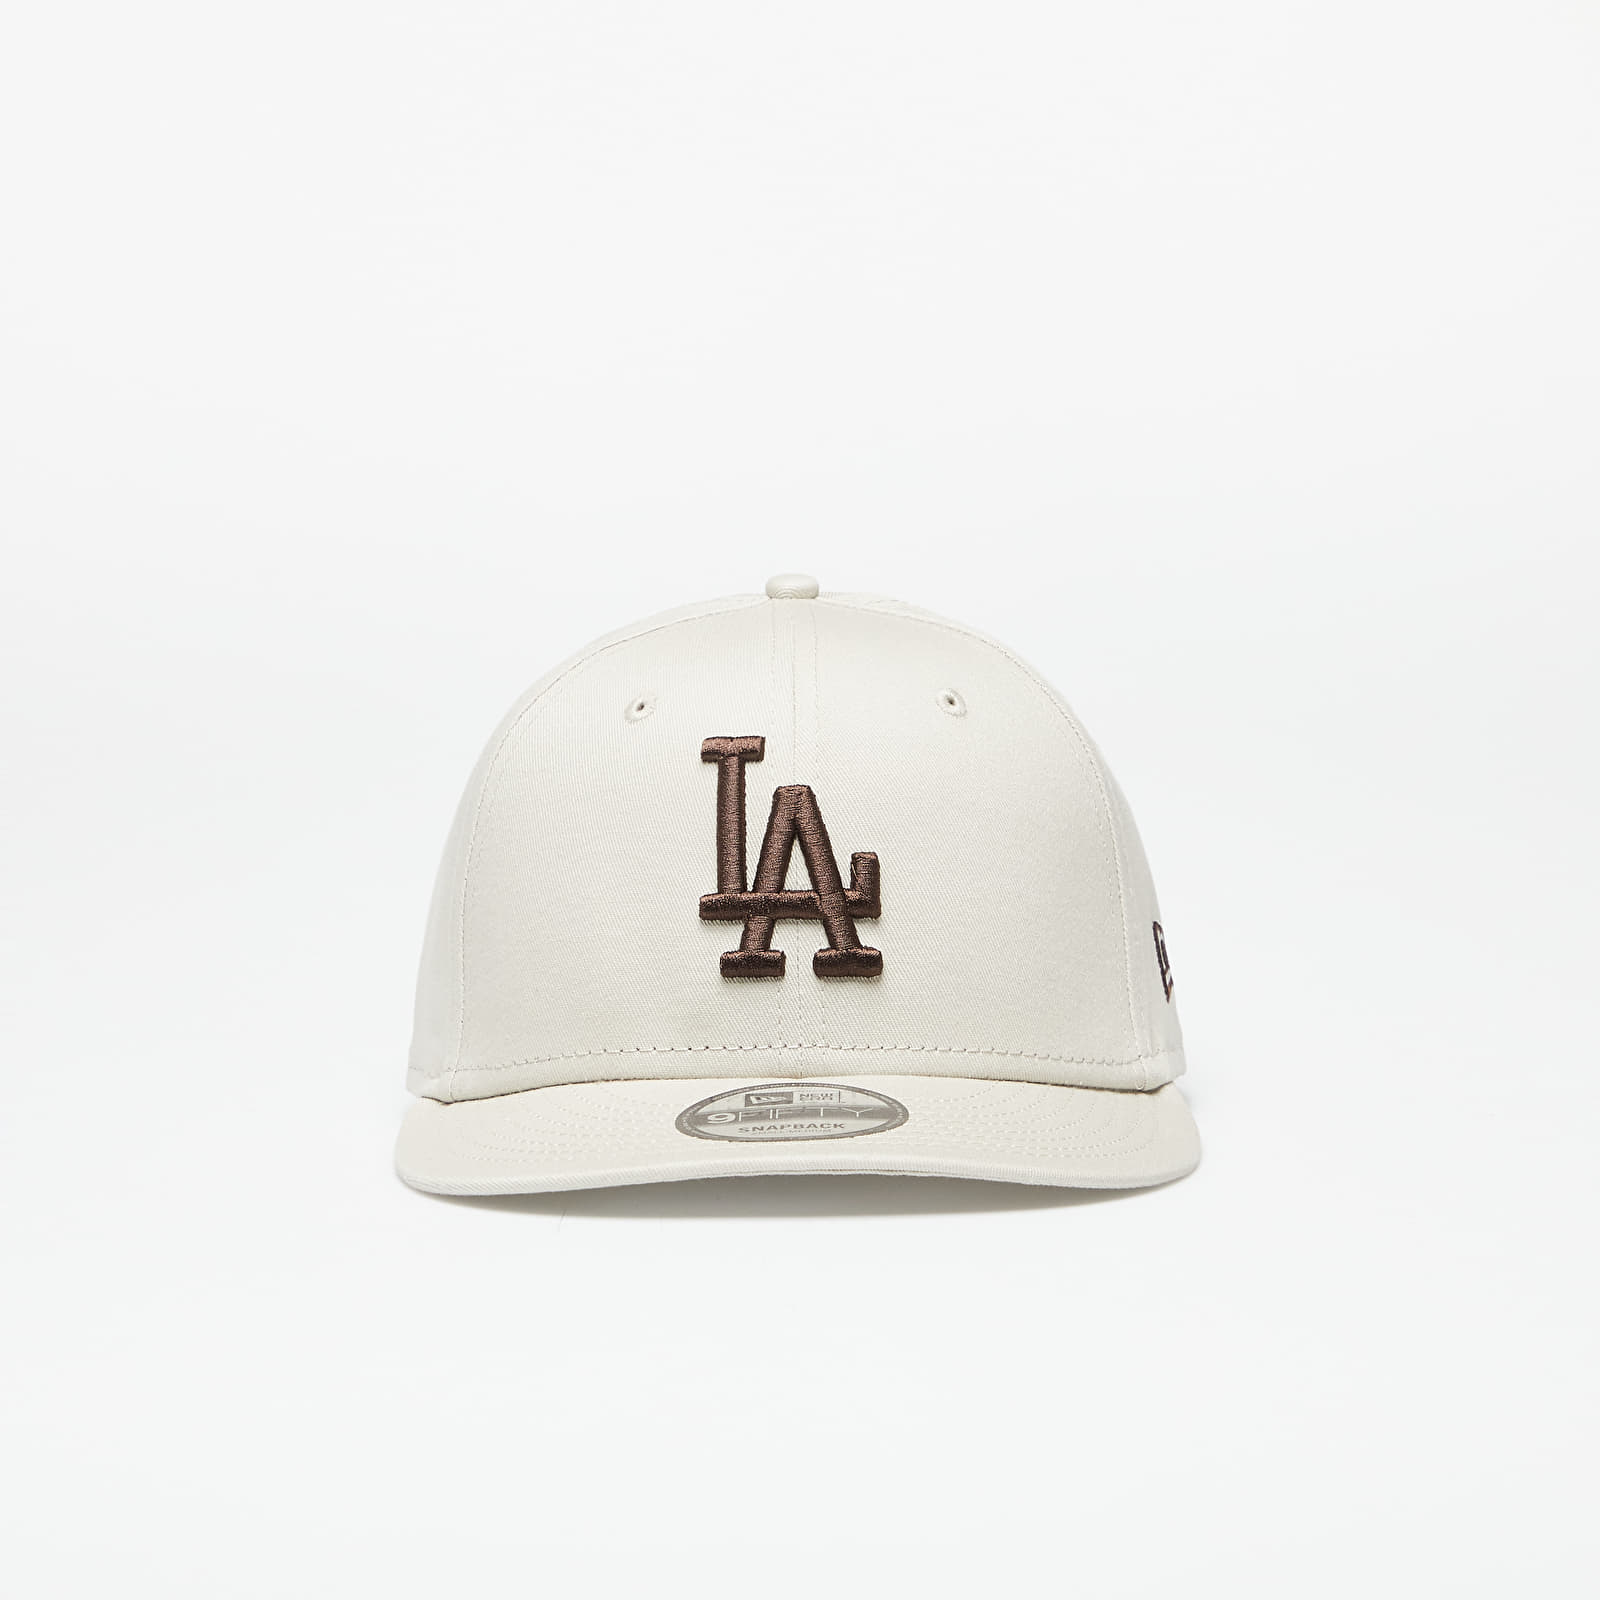 New Era - los angeles dodgers league essential 9fifty snapback cap stone/ nfl brown suede